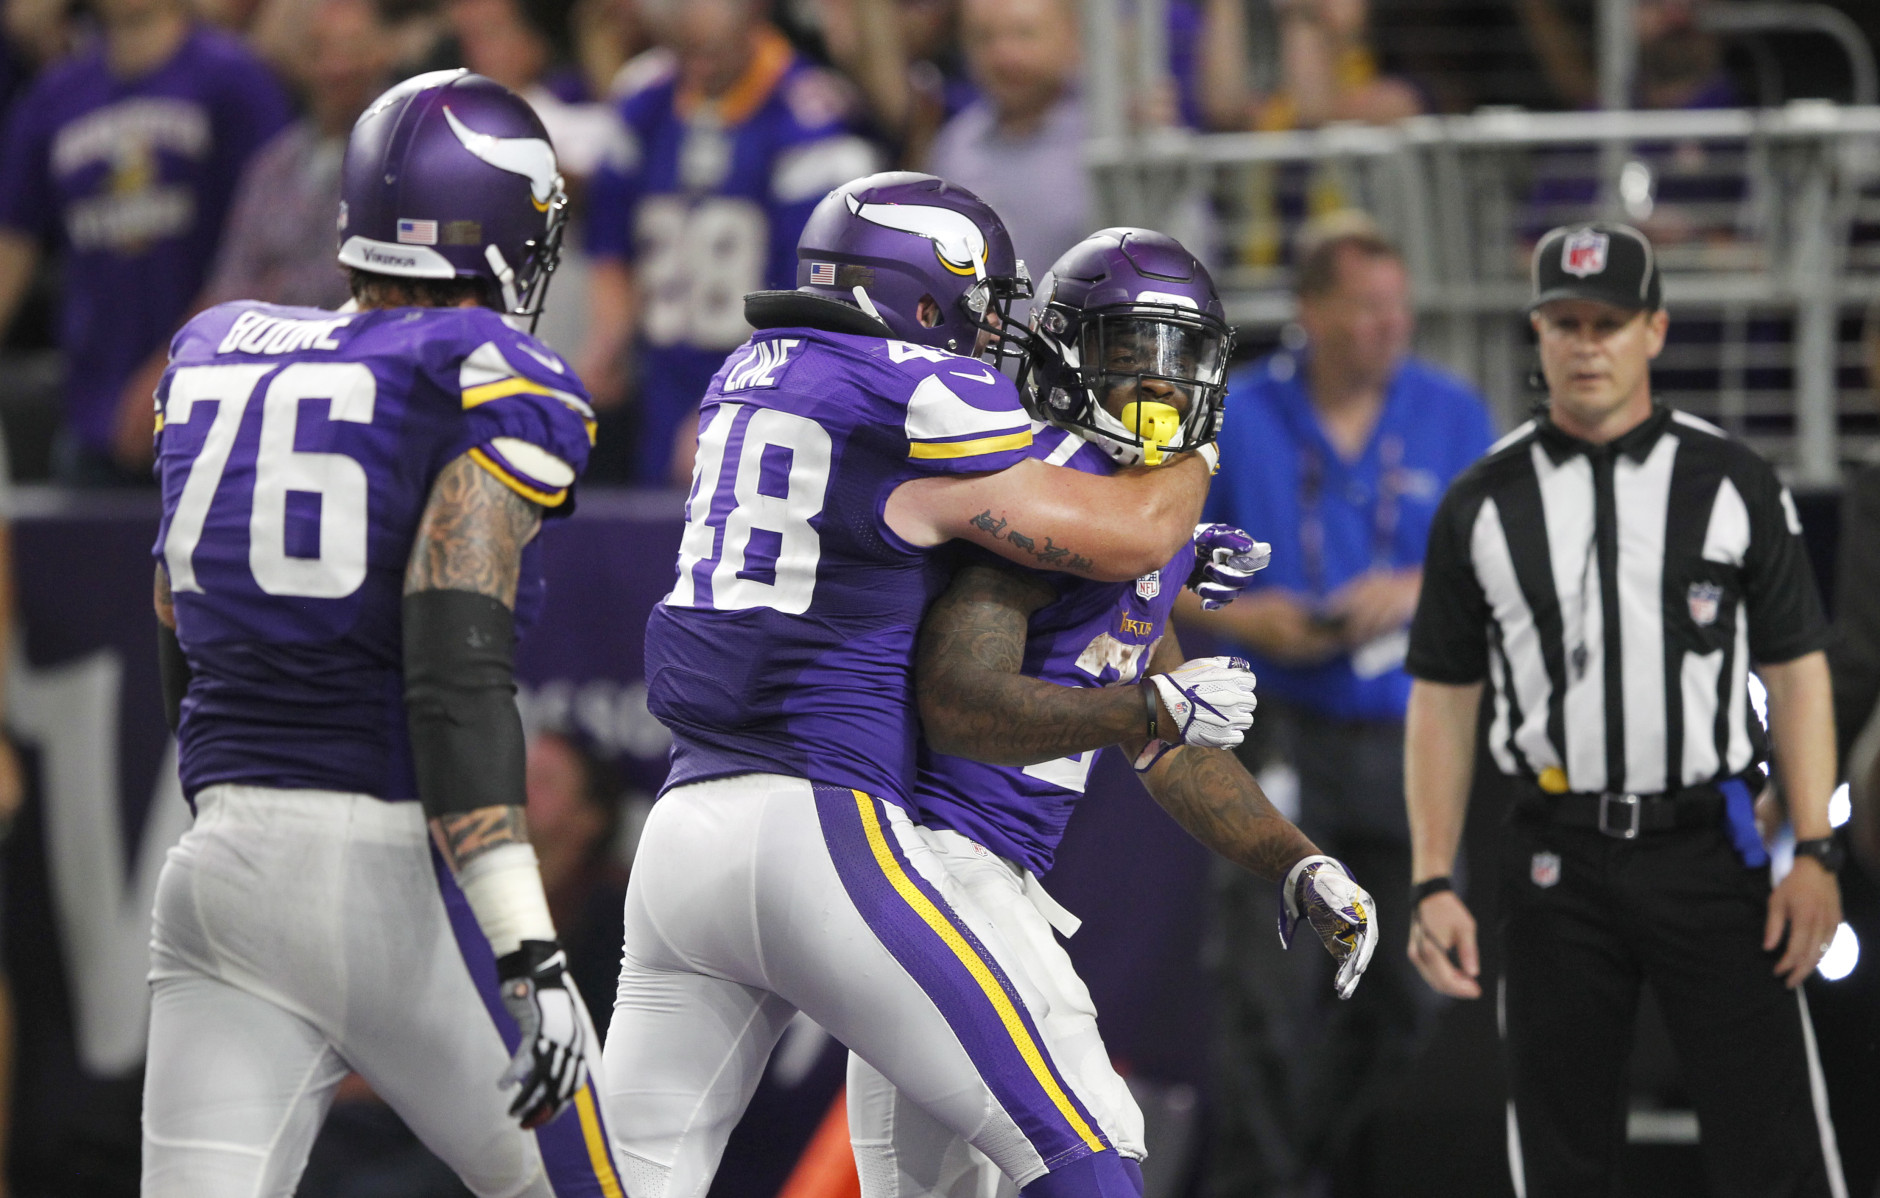 Minnesota Vikings running back Jerick McKinnon, right, celebrates with teammates Zach Line, center, and Alex Boone, left, after scoring on a 4-yard touchdown run during the second half of an NFL football game against the New York Giants Monday, Oct. 3, 2016, in Minneapolis. (AP Photo/Andy Clayton-King)